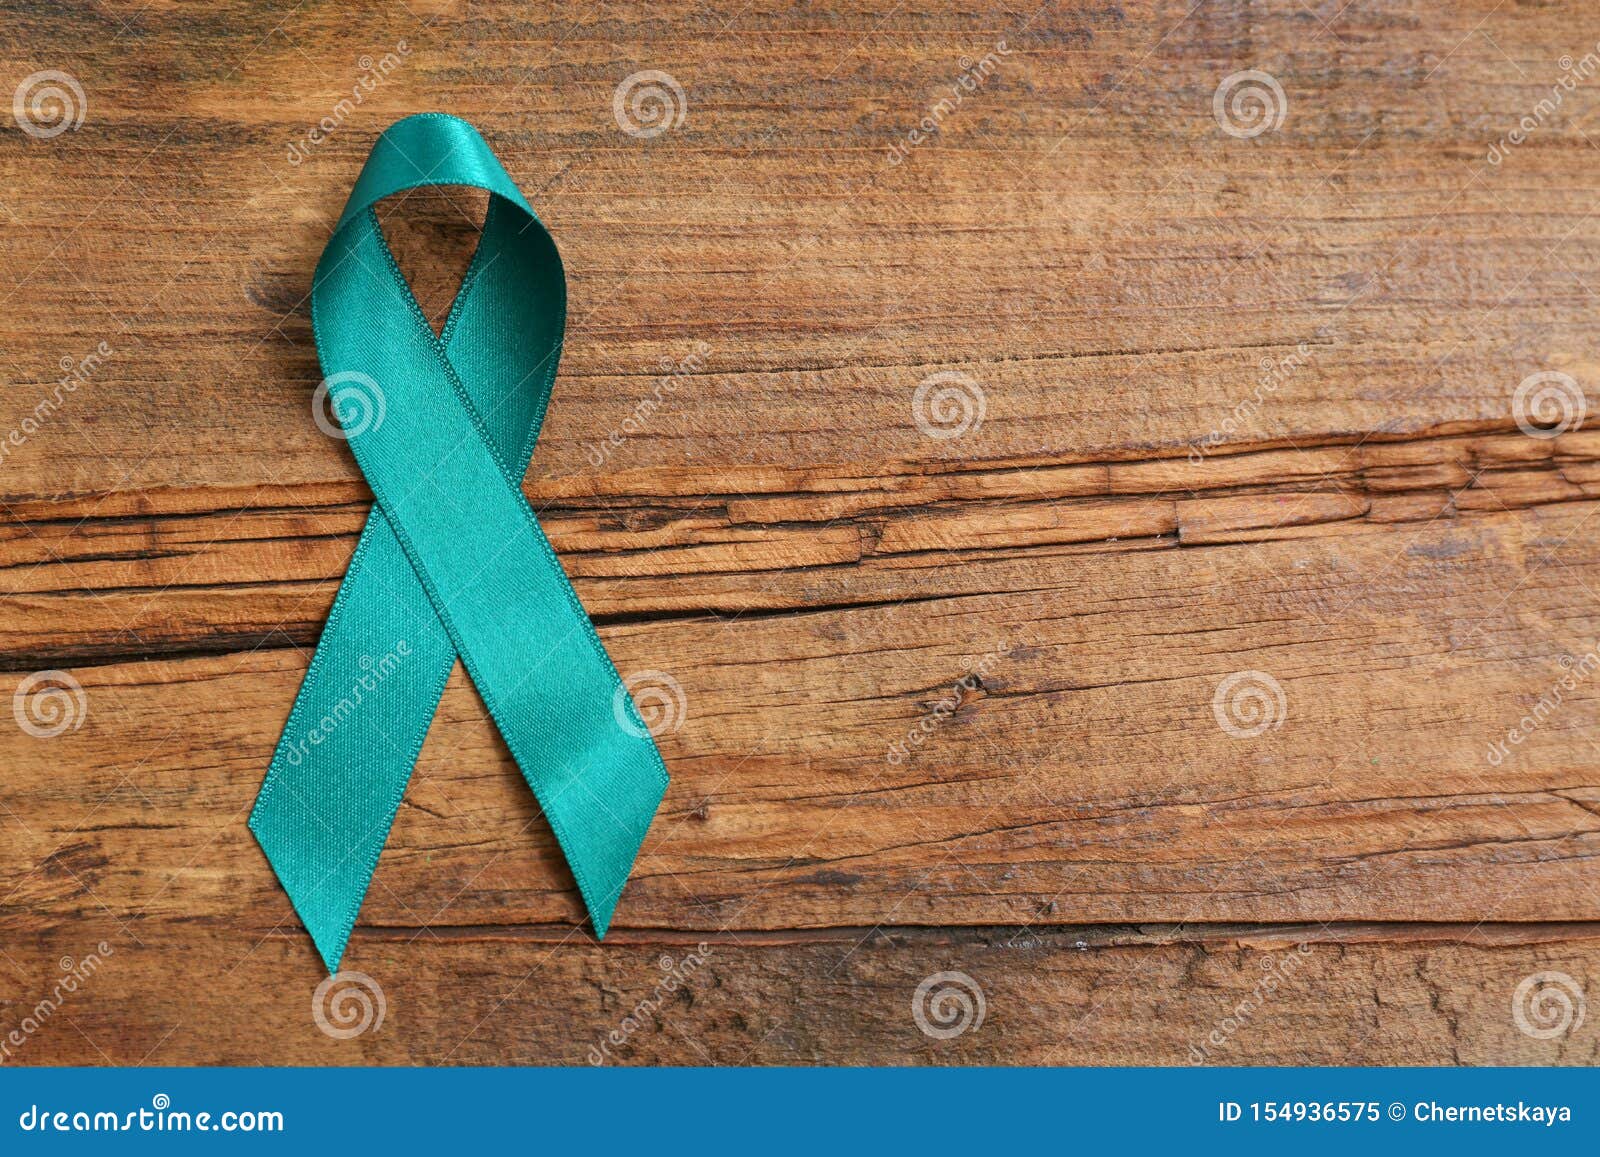 teal awareness ribbon on wooden background, top view with space for text.  of social and medical